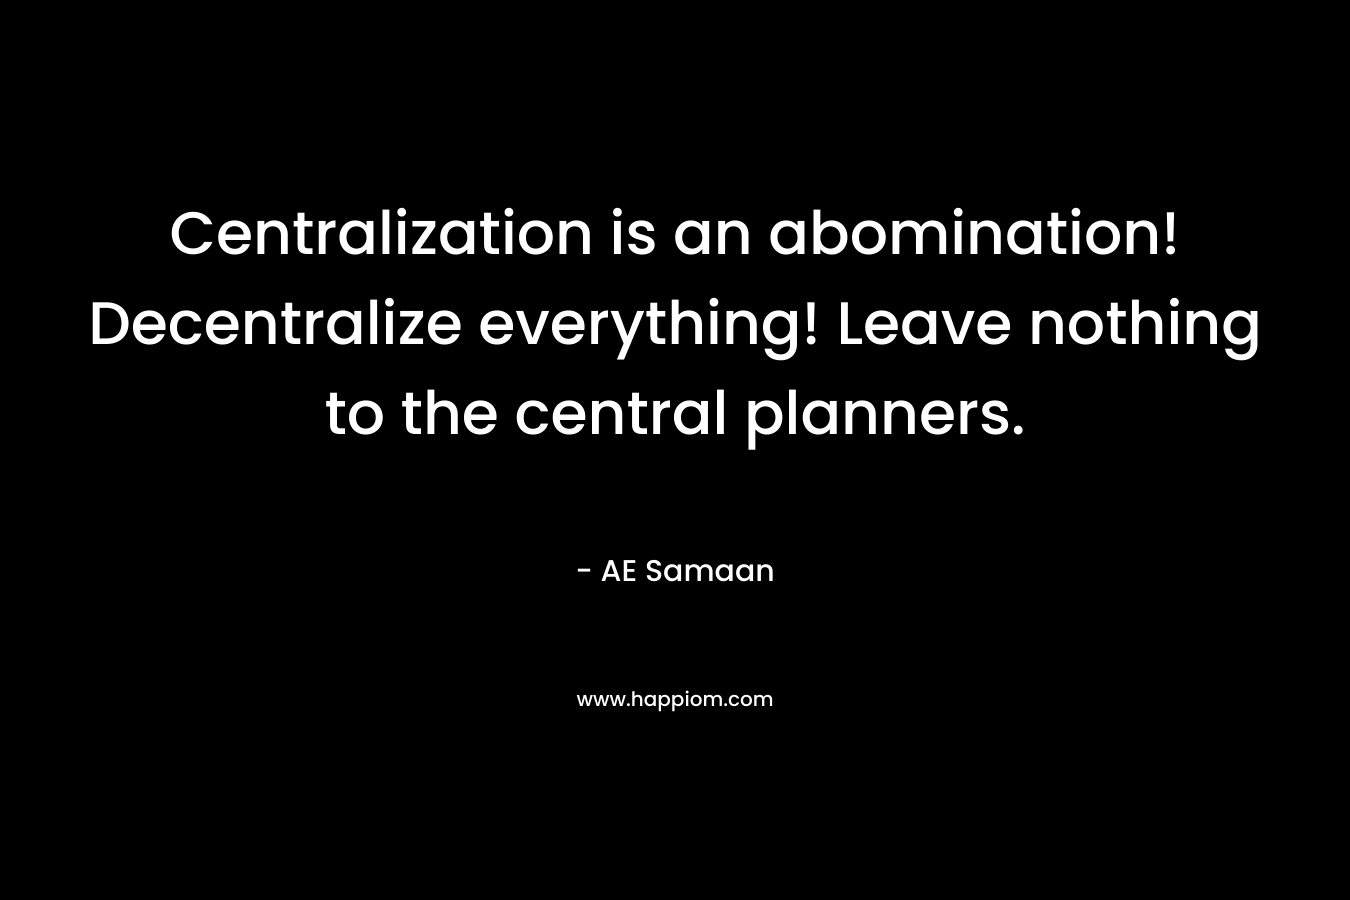 Centralization is an abomination! Decentralize everything! Leave nothing to the central planners.